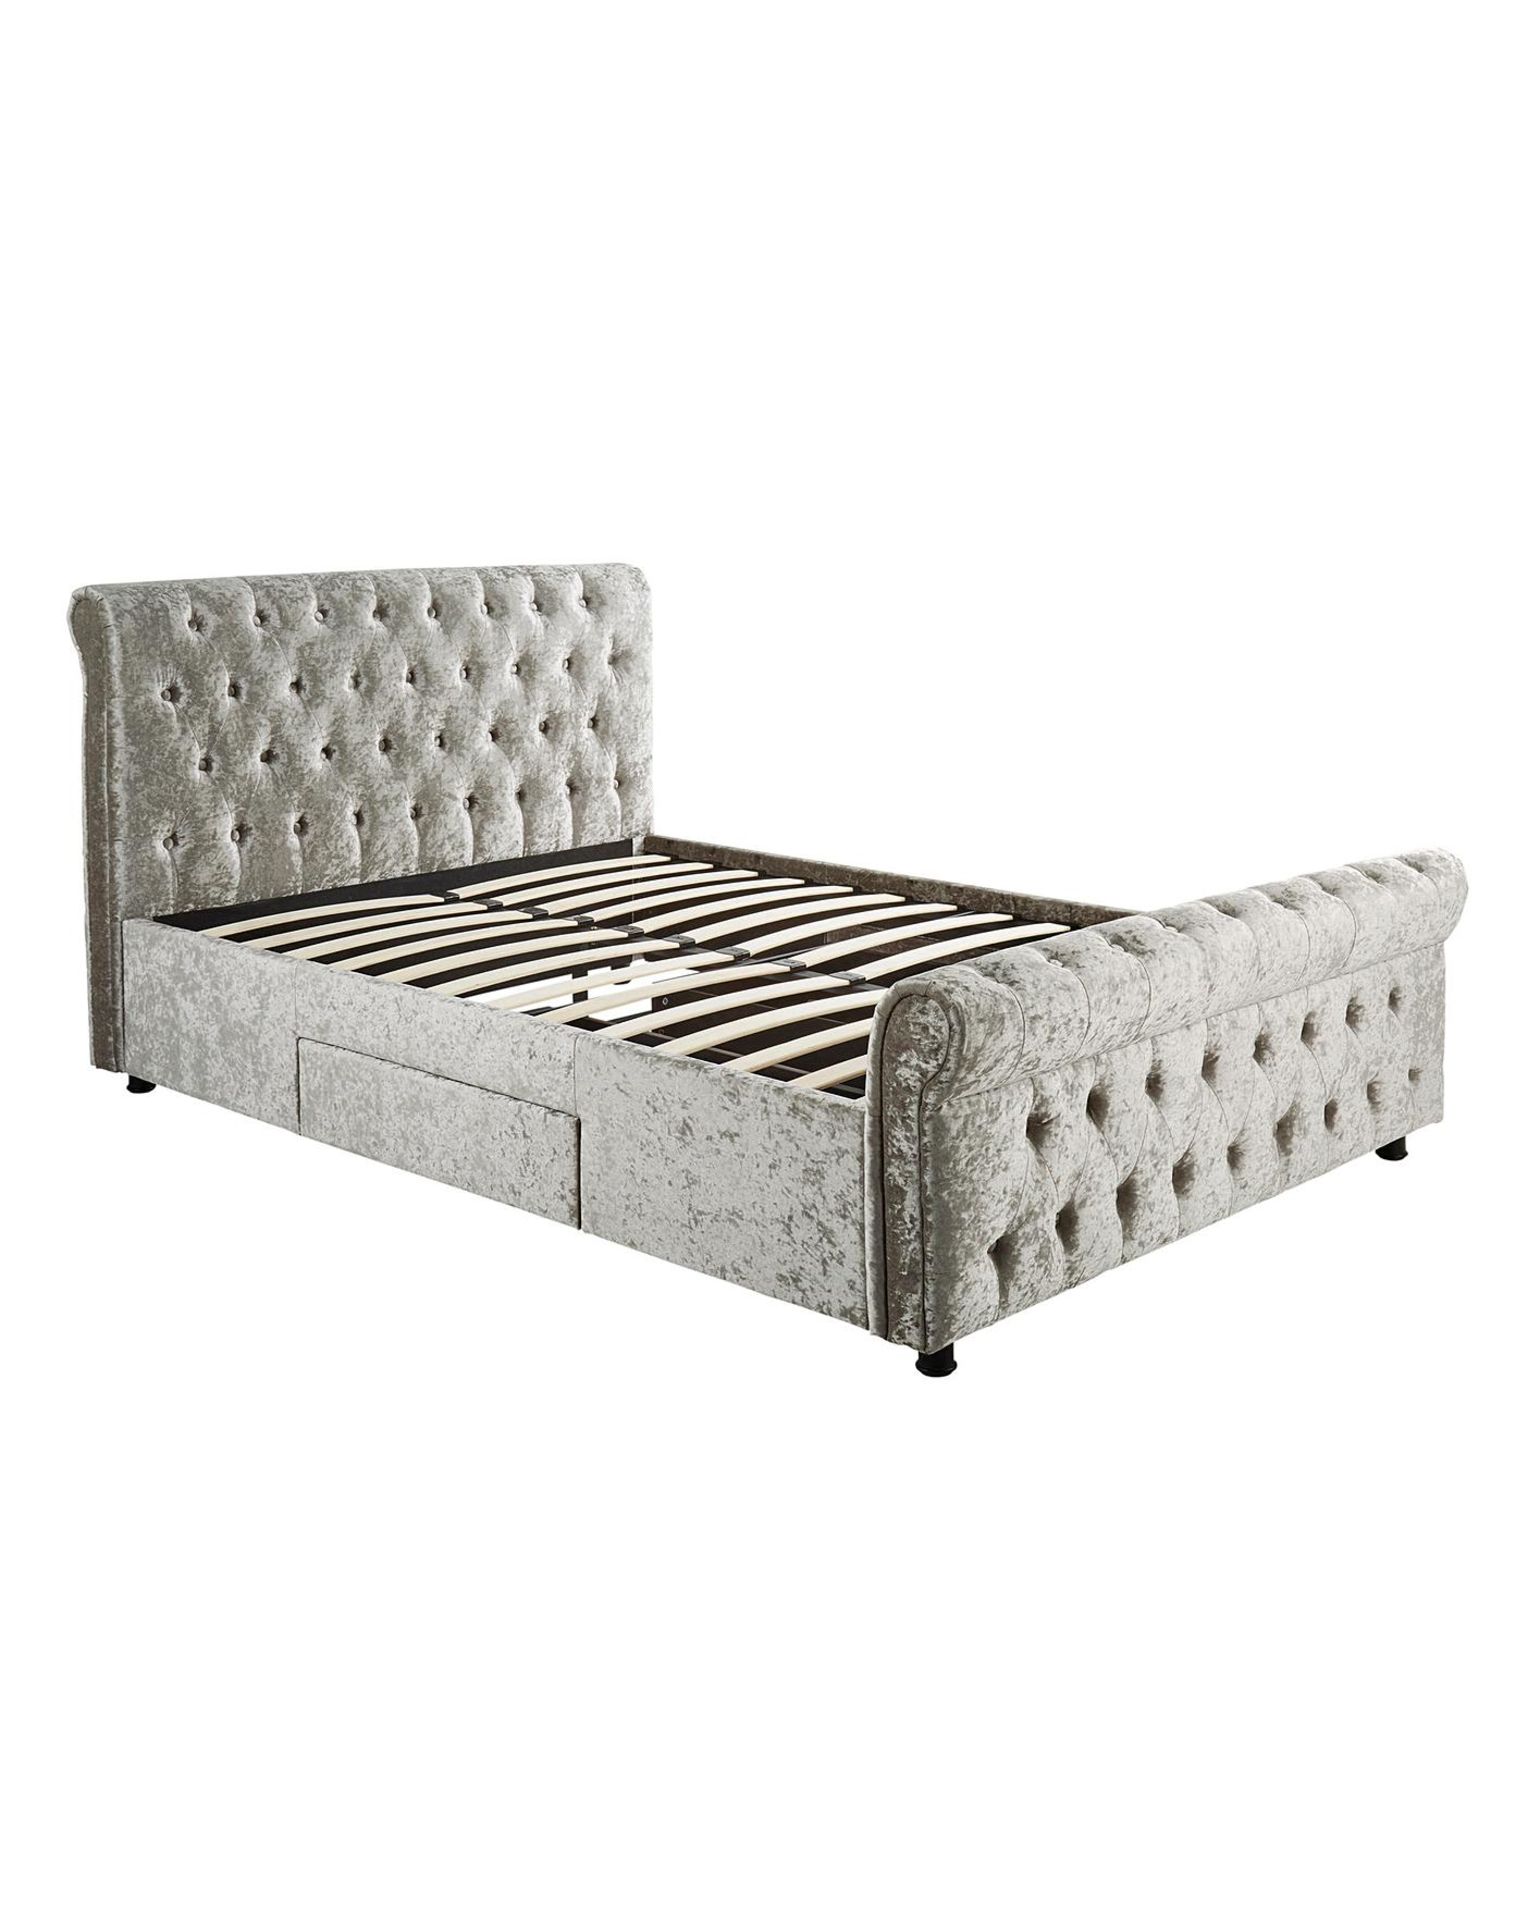 NEW & BOXED KINGSTON Crushed Velvet Bed Frame with 2 Storage Drawers - SILVER. RRP £549. The - Bild 2 aus 3